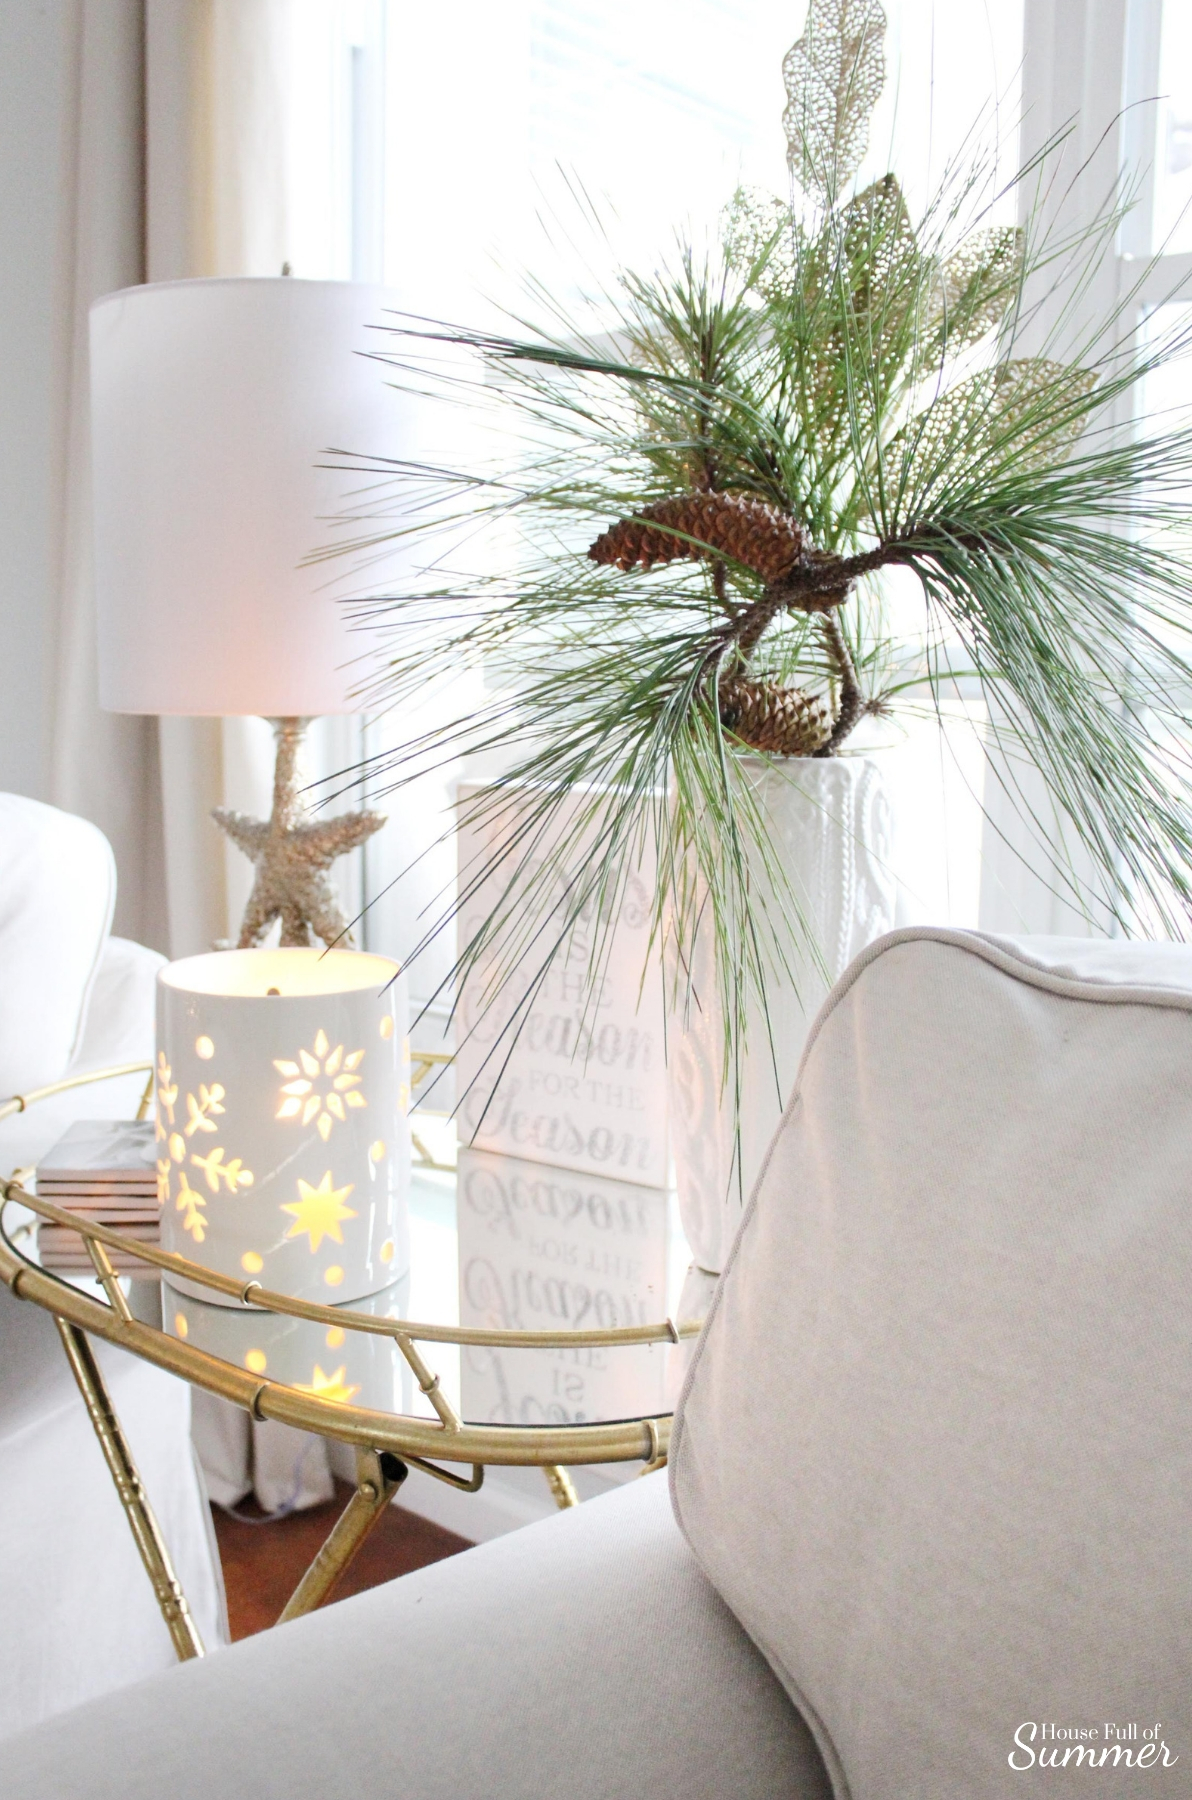 The Frugal Way to Add Rich Gold Decor Accents - South House Designs